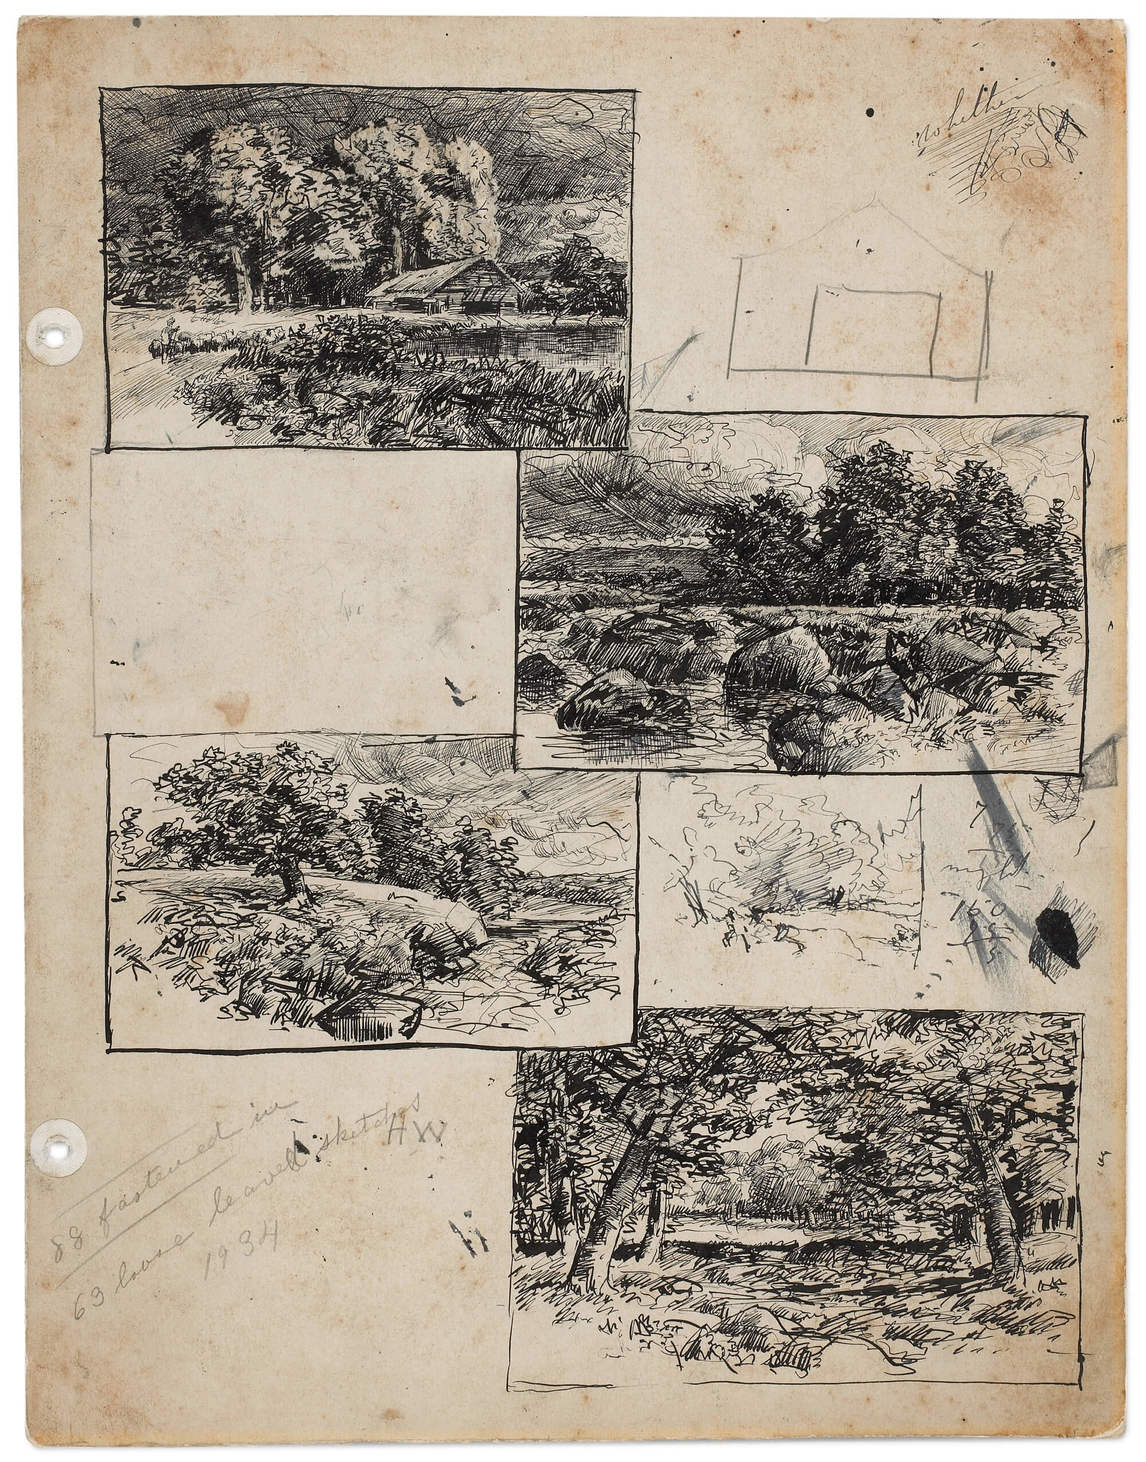 Homer Watson, landscape drawings and a preliminary outline of a building, c.1895–96